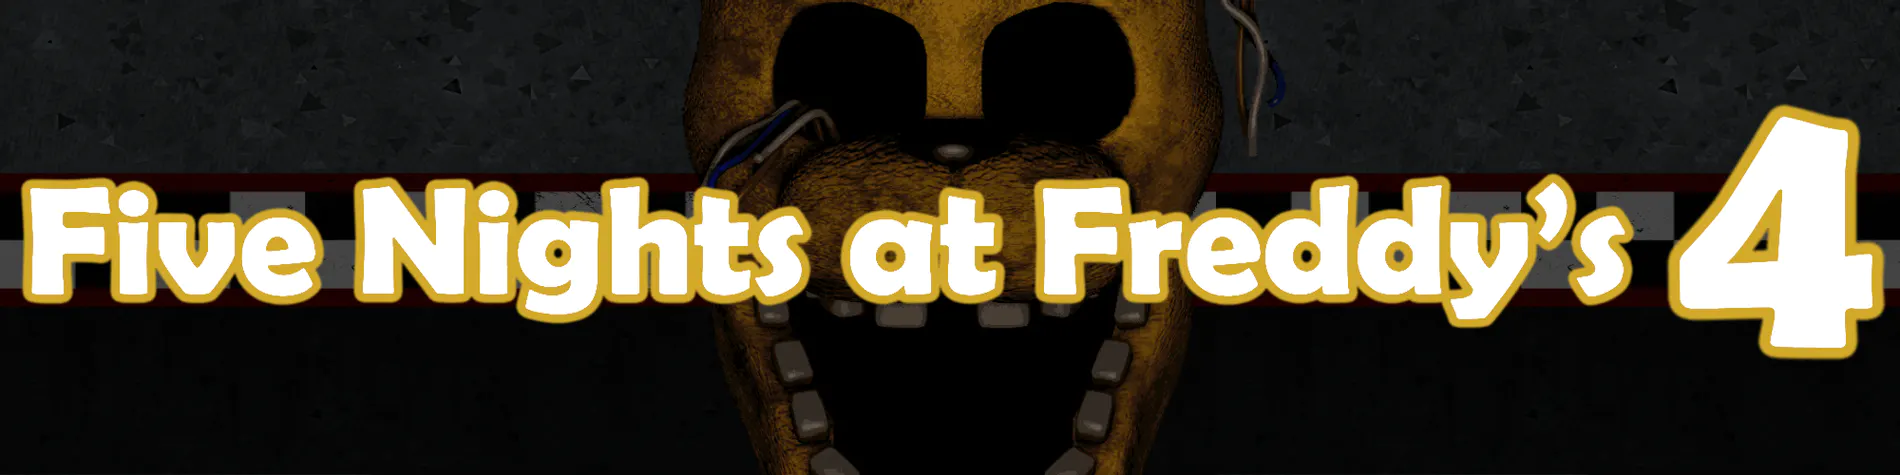 Five Nights at Freddy's 4 (FAN-MADE)